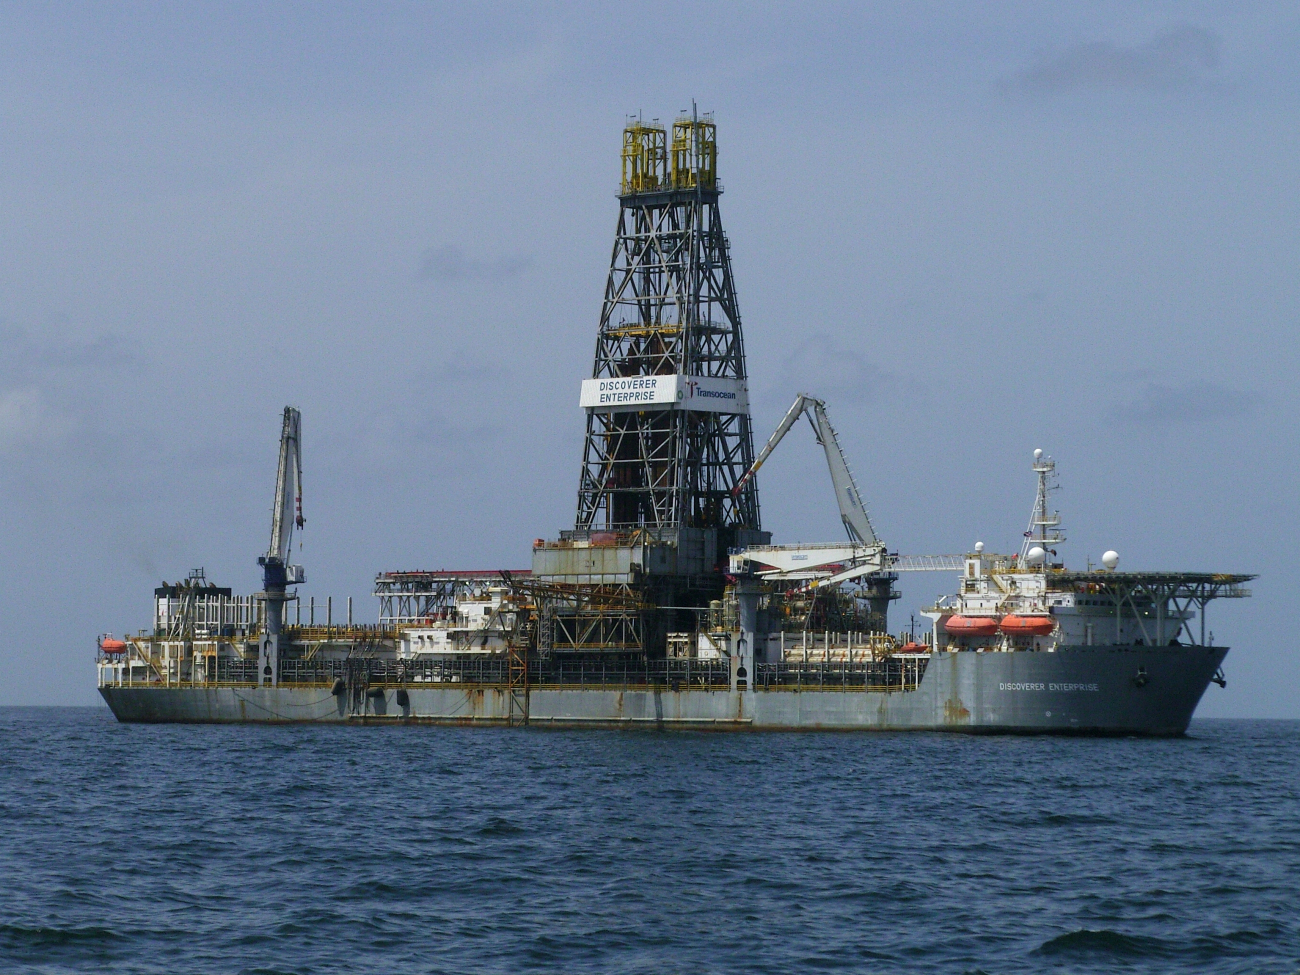 The drill ship DISCOVERER ENTERPRISE seen in the Gulf of Mexico